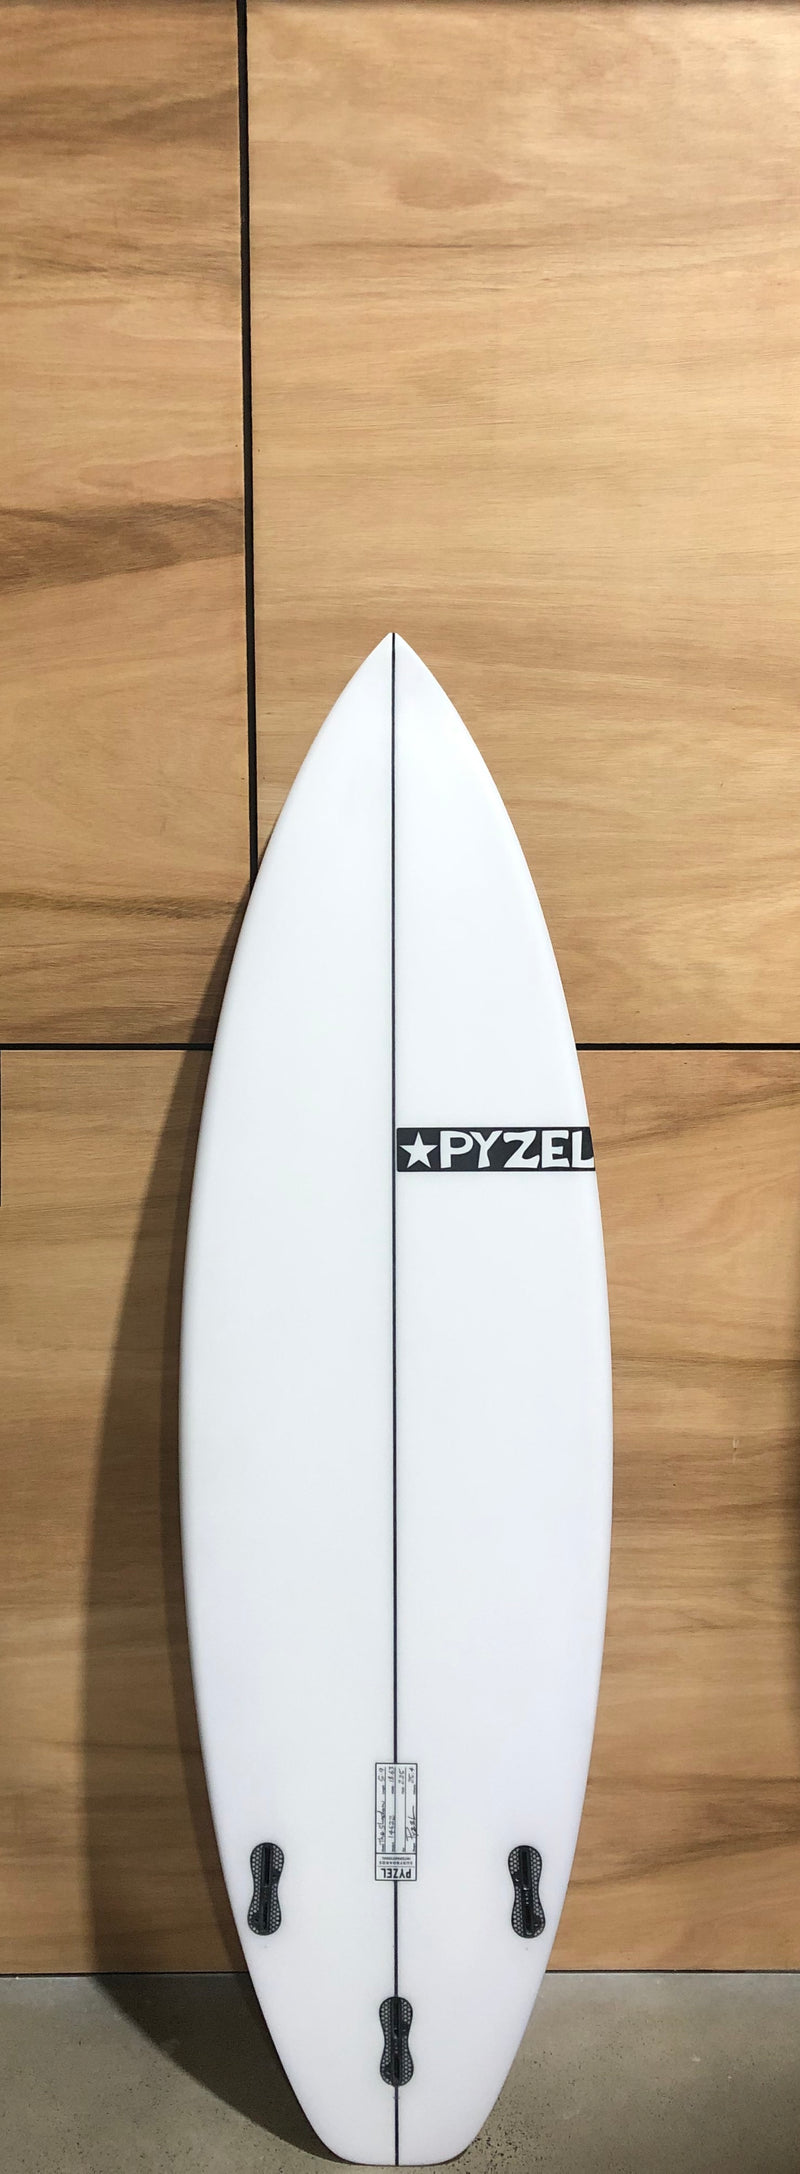 Pyzel The Shadow - Board Store PyzelSurfboard  